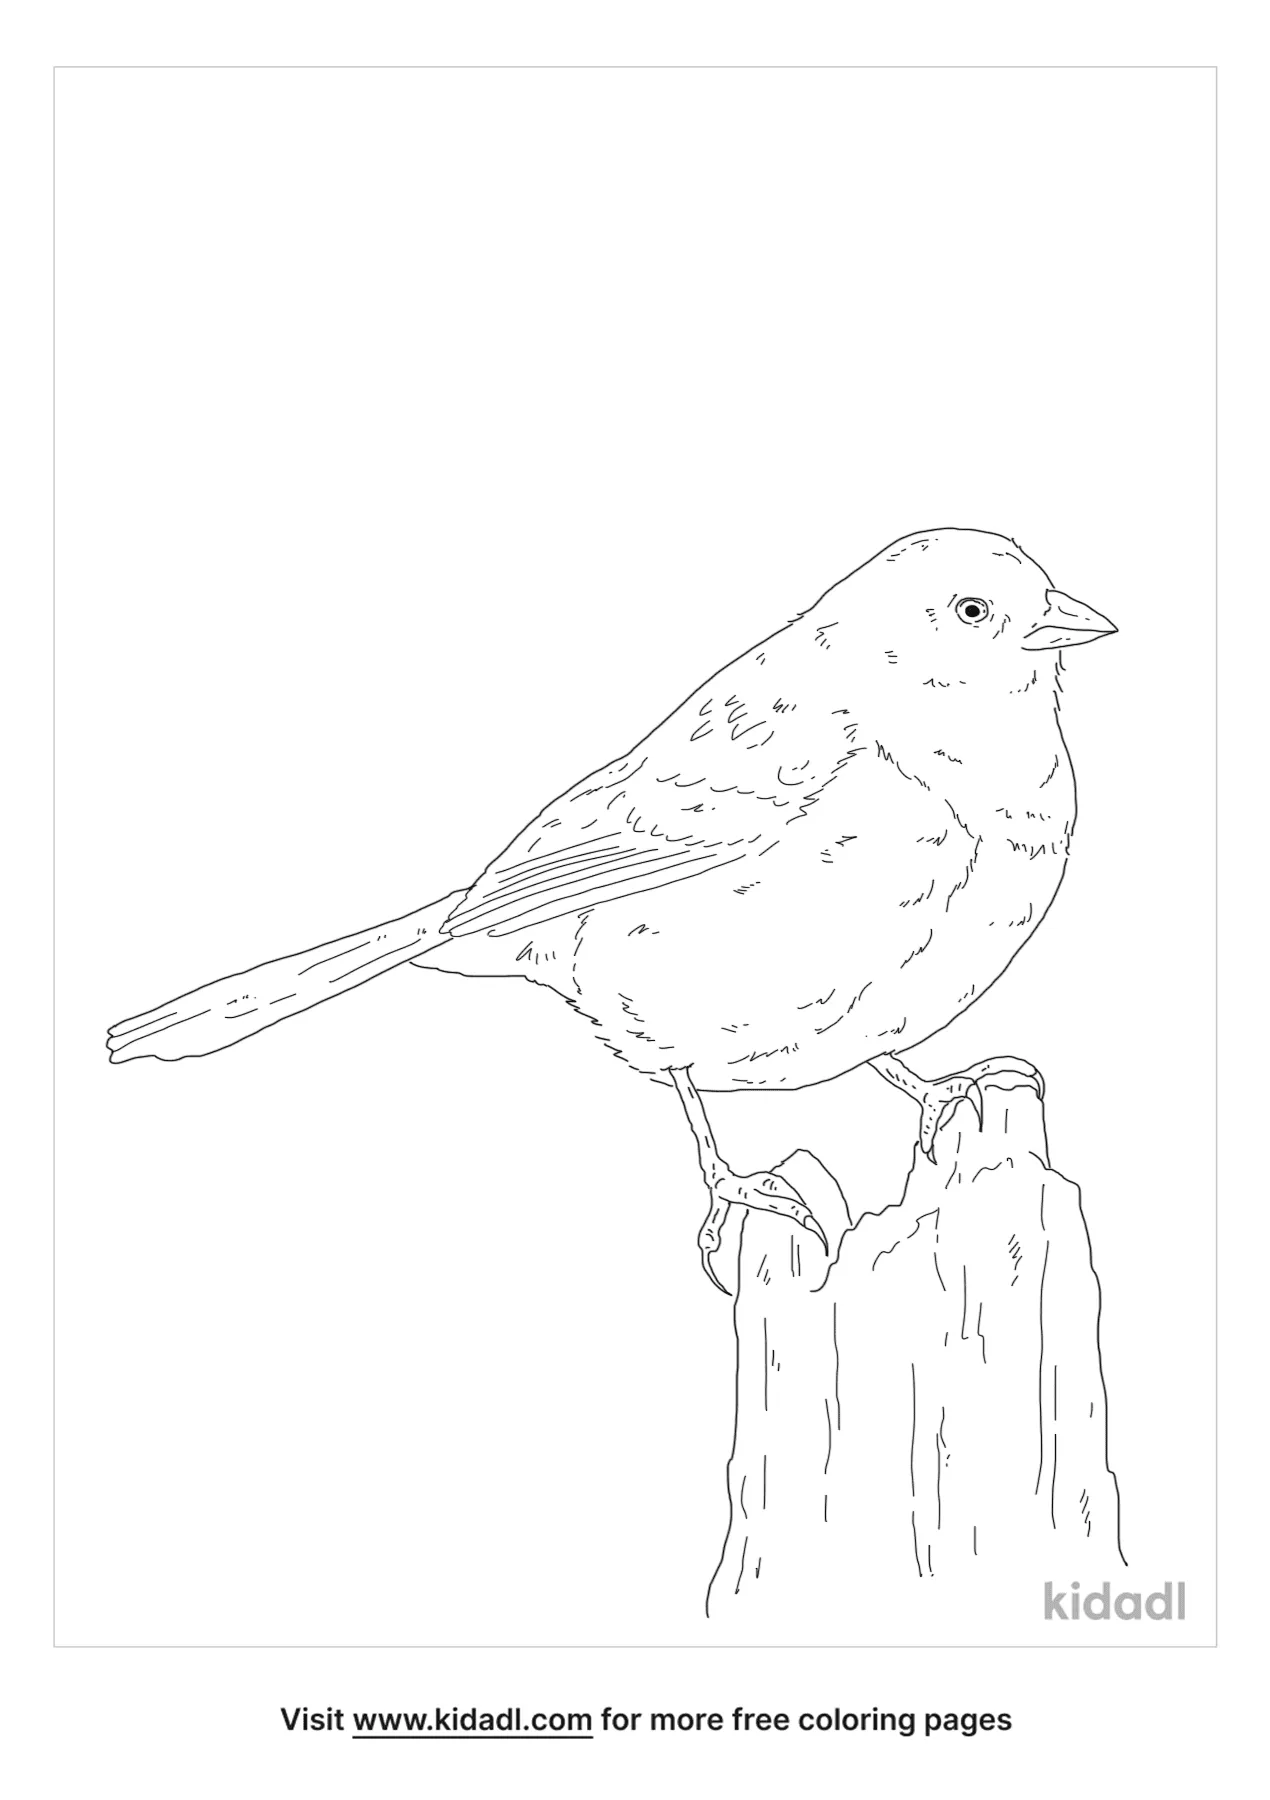 Free Towhee Coloring Page | Coloring Page Printables | Kidadl